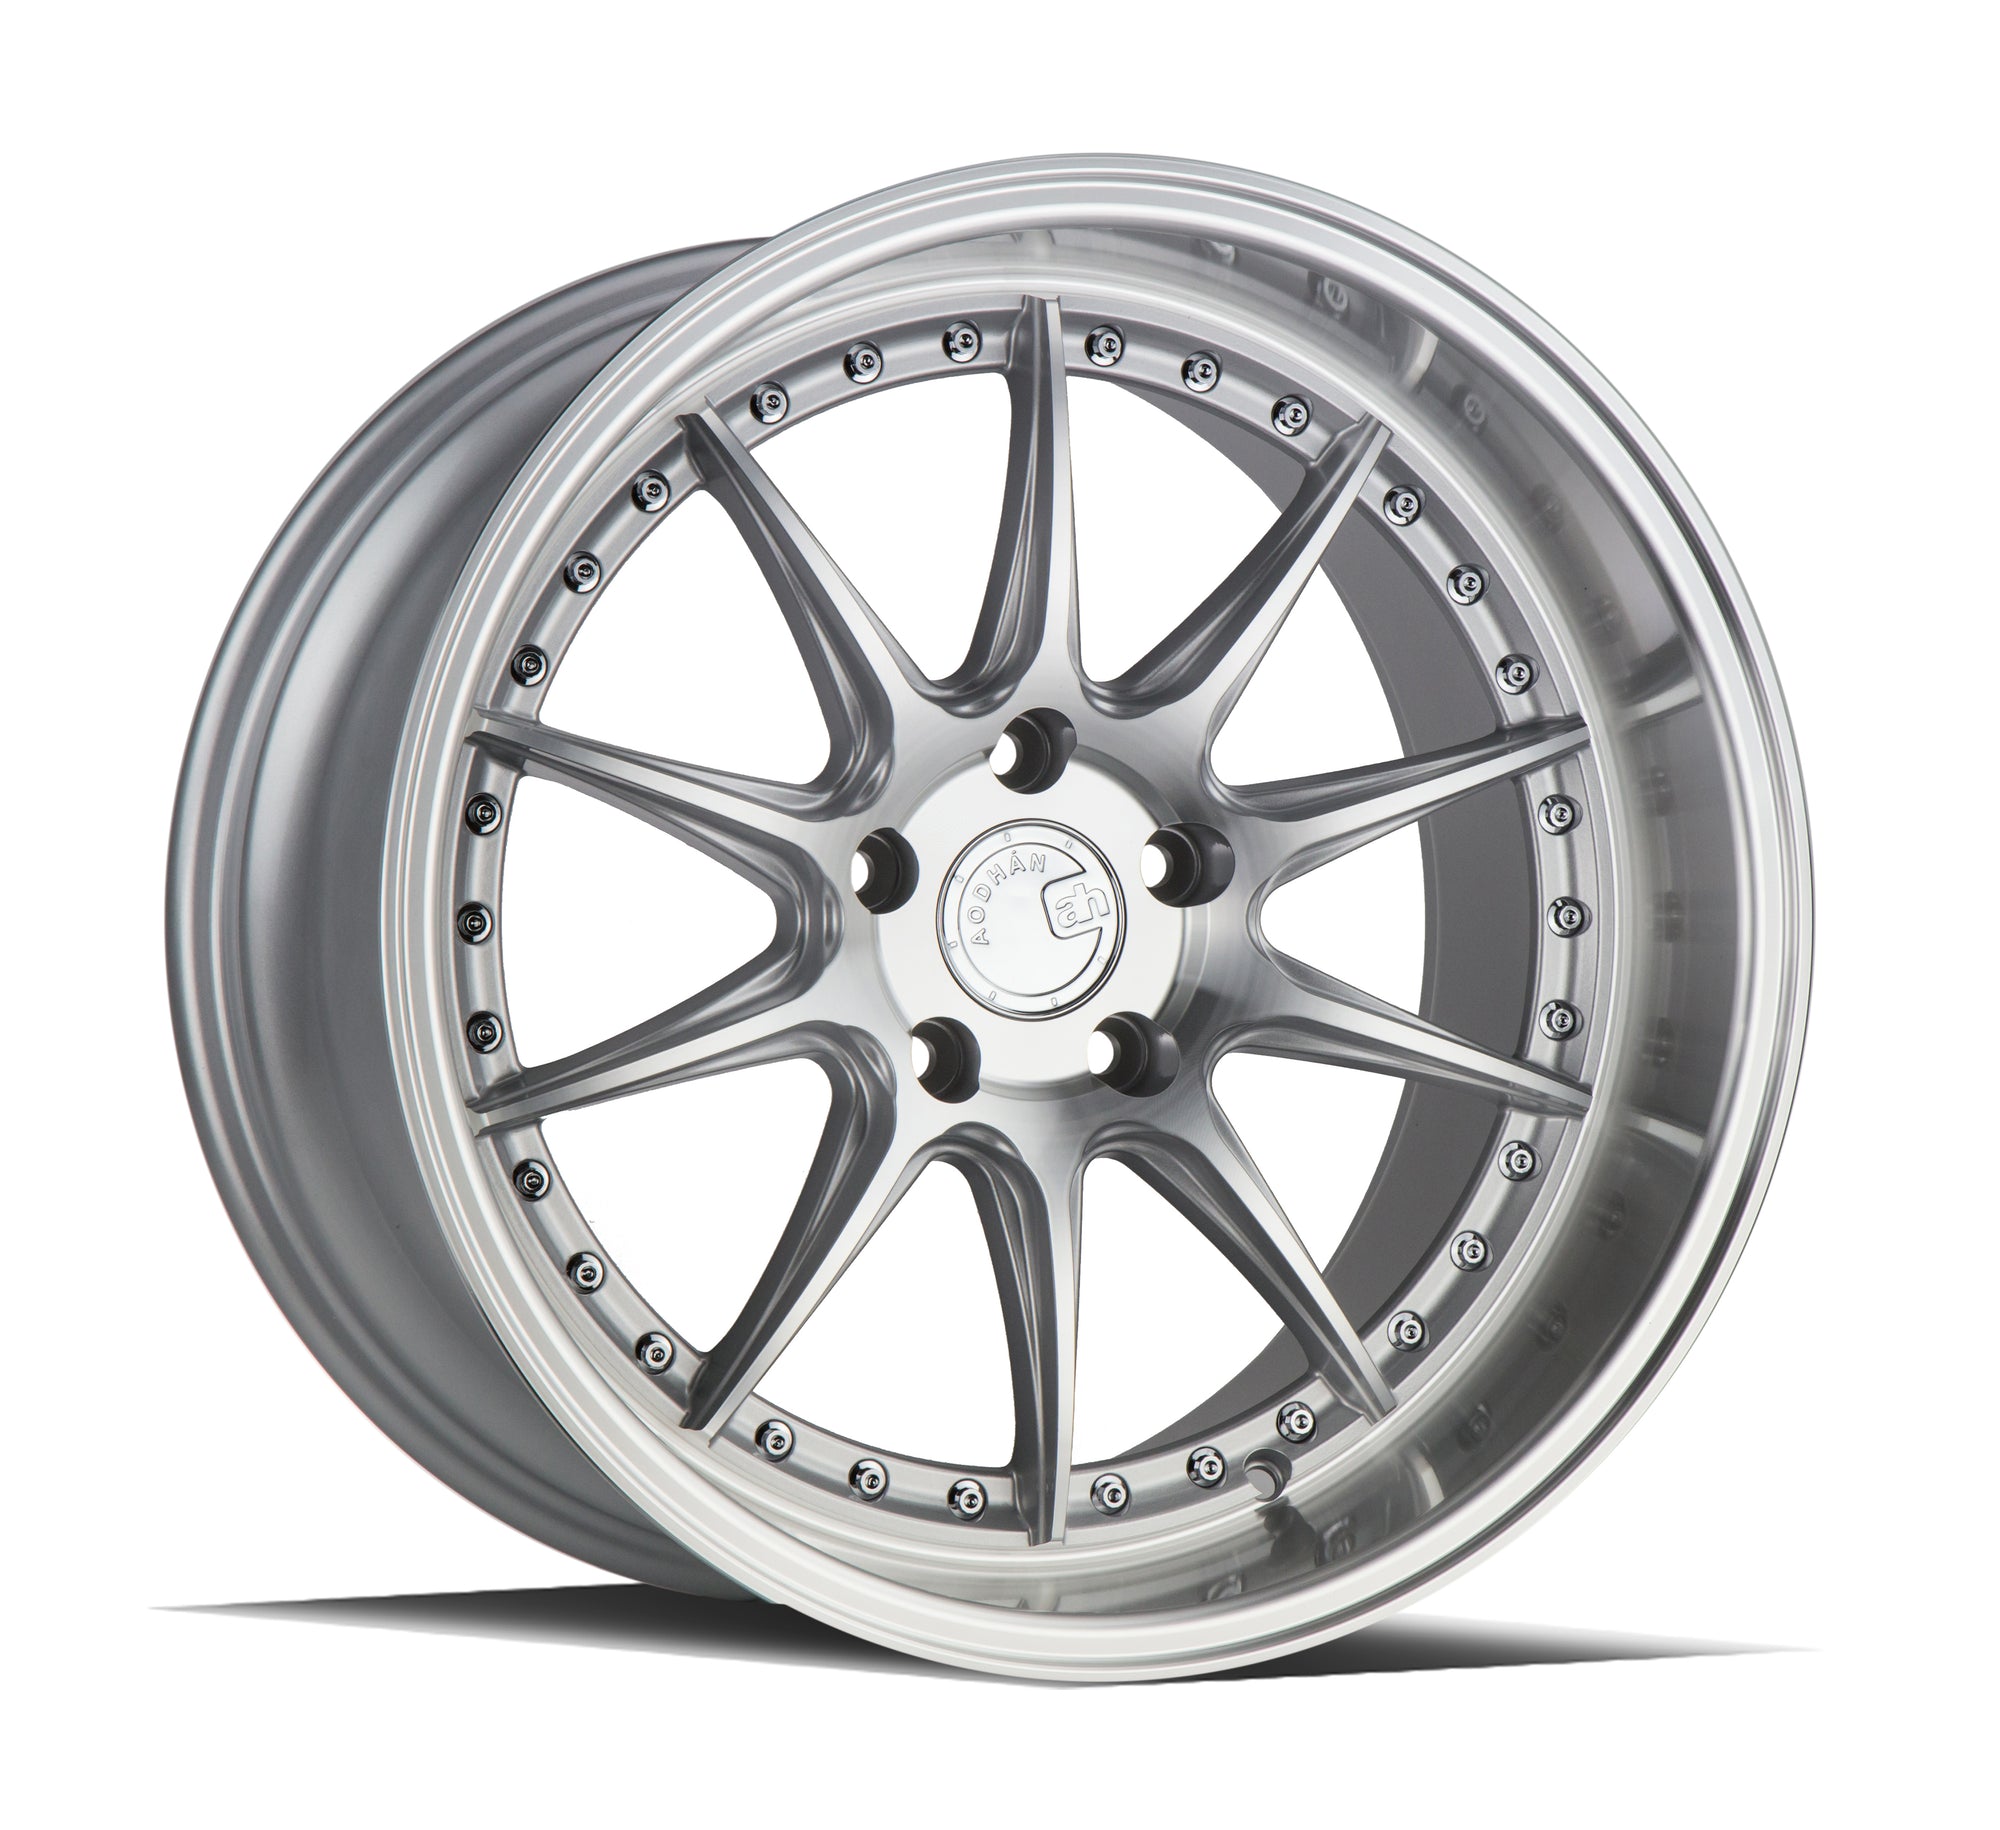 Aodhan DS07 18x10.5 5x114.3 +22 Silver w/Machined Face